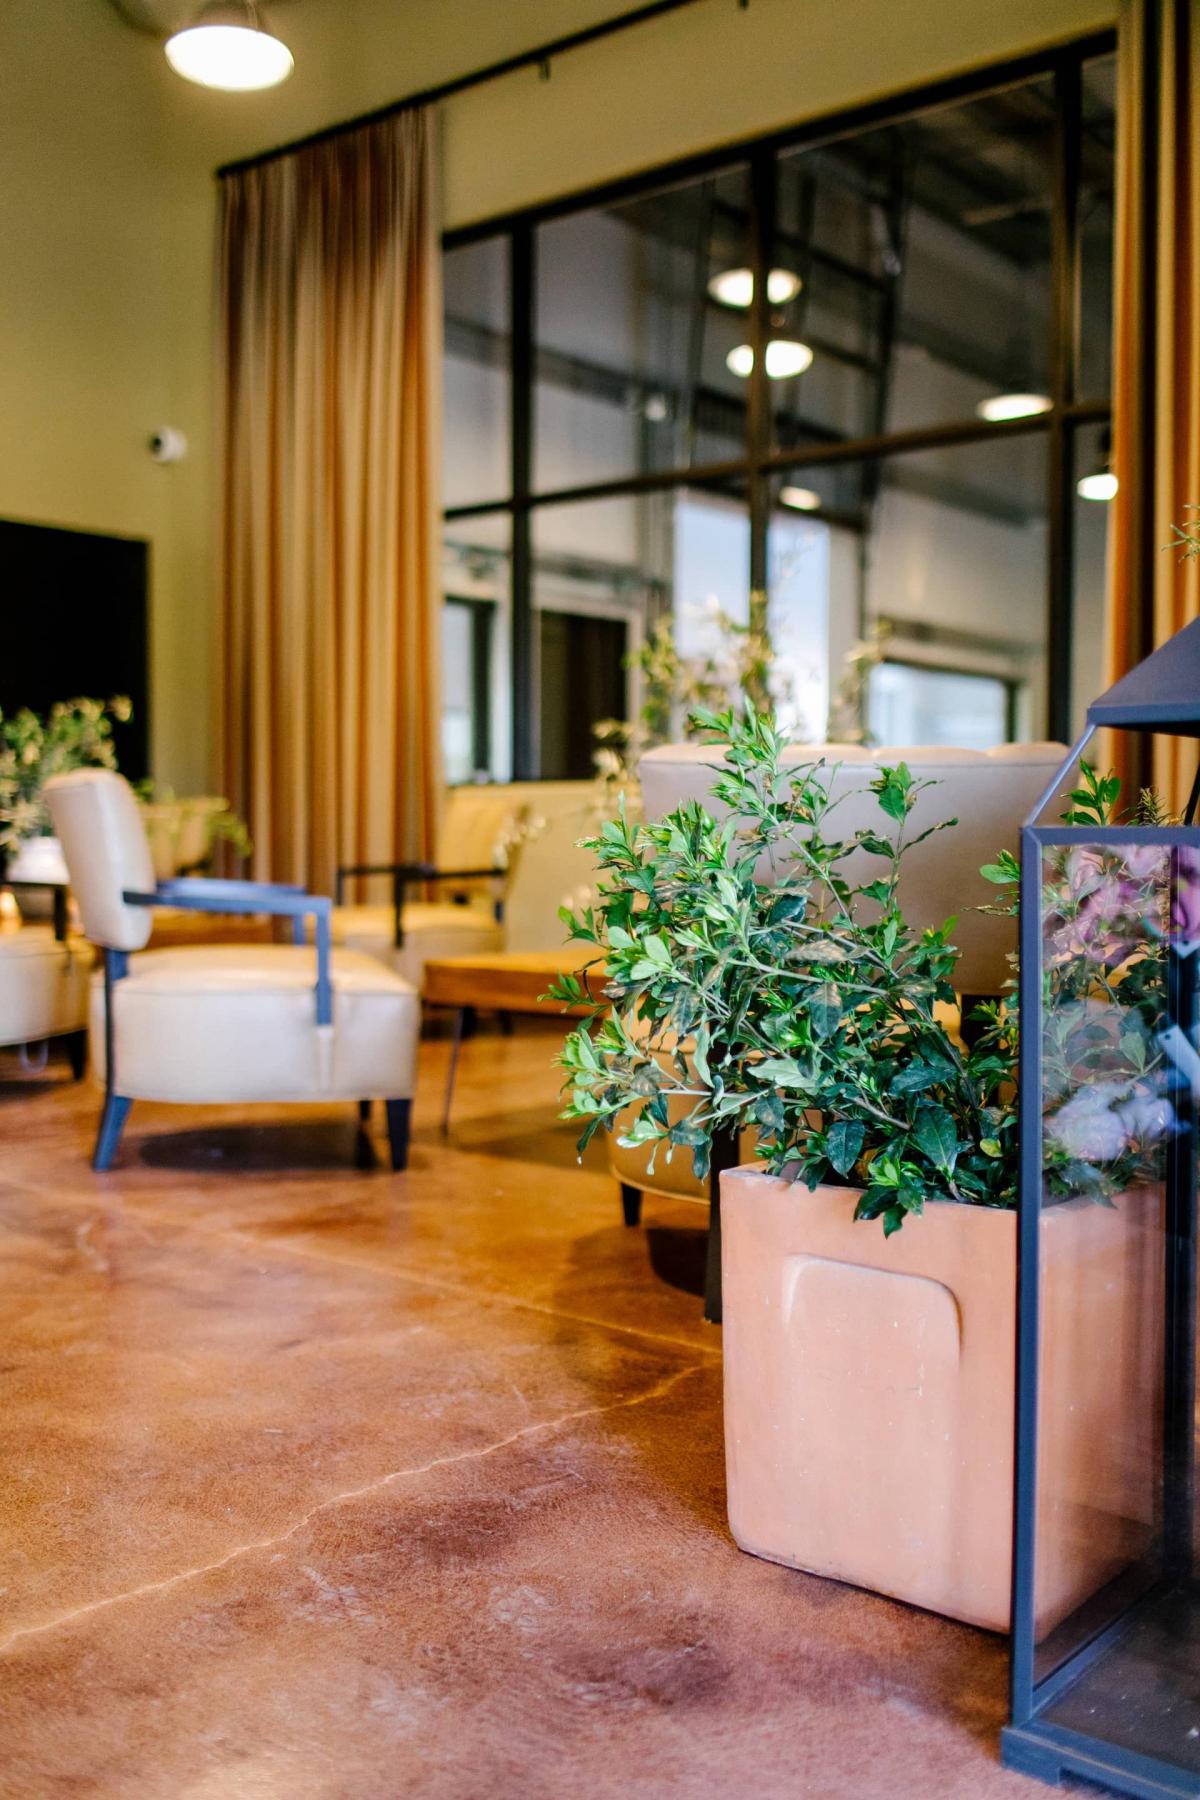 Petros Winery Reception Area with Chairs and Planters